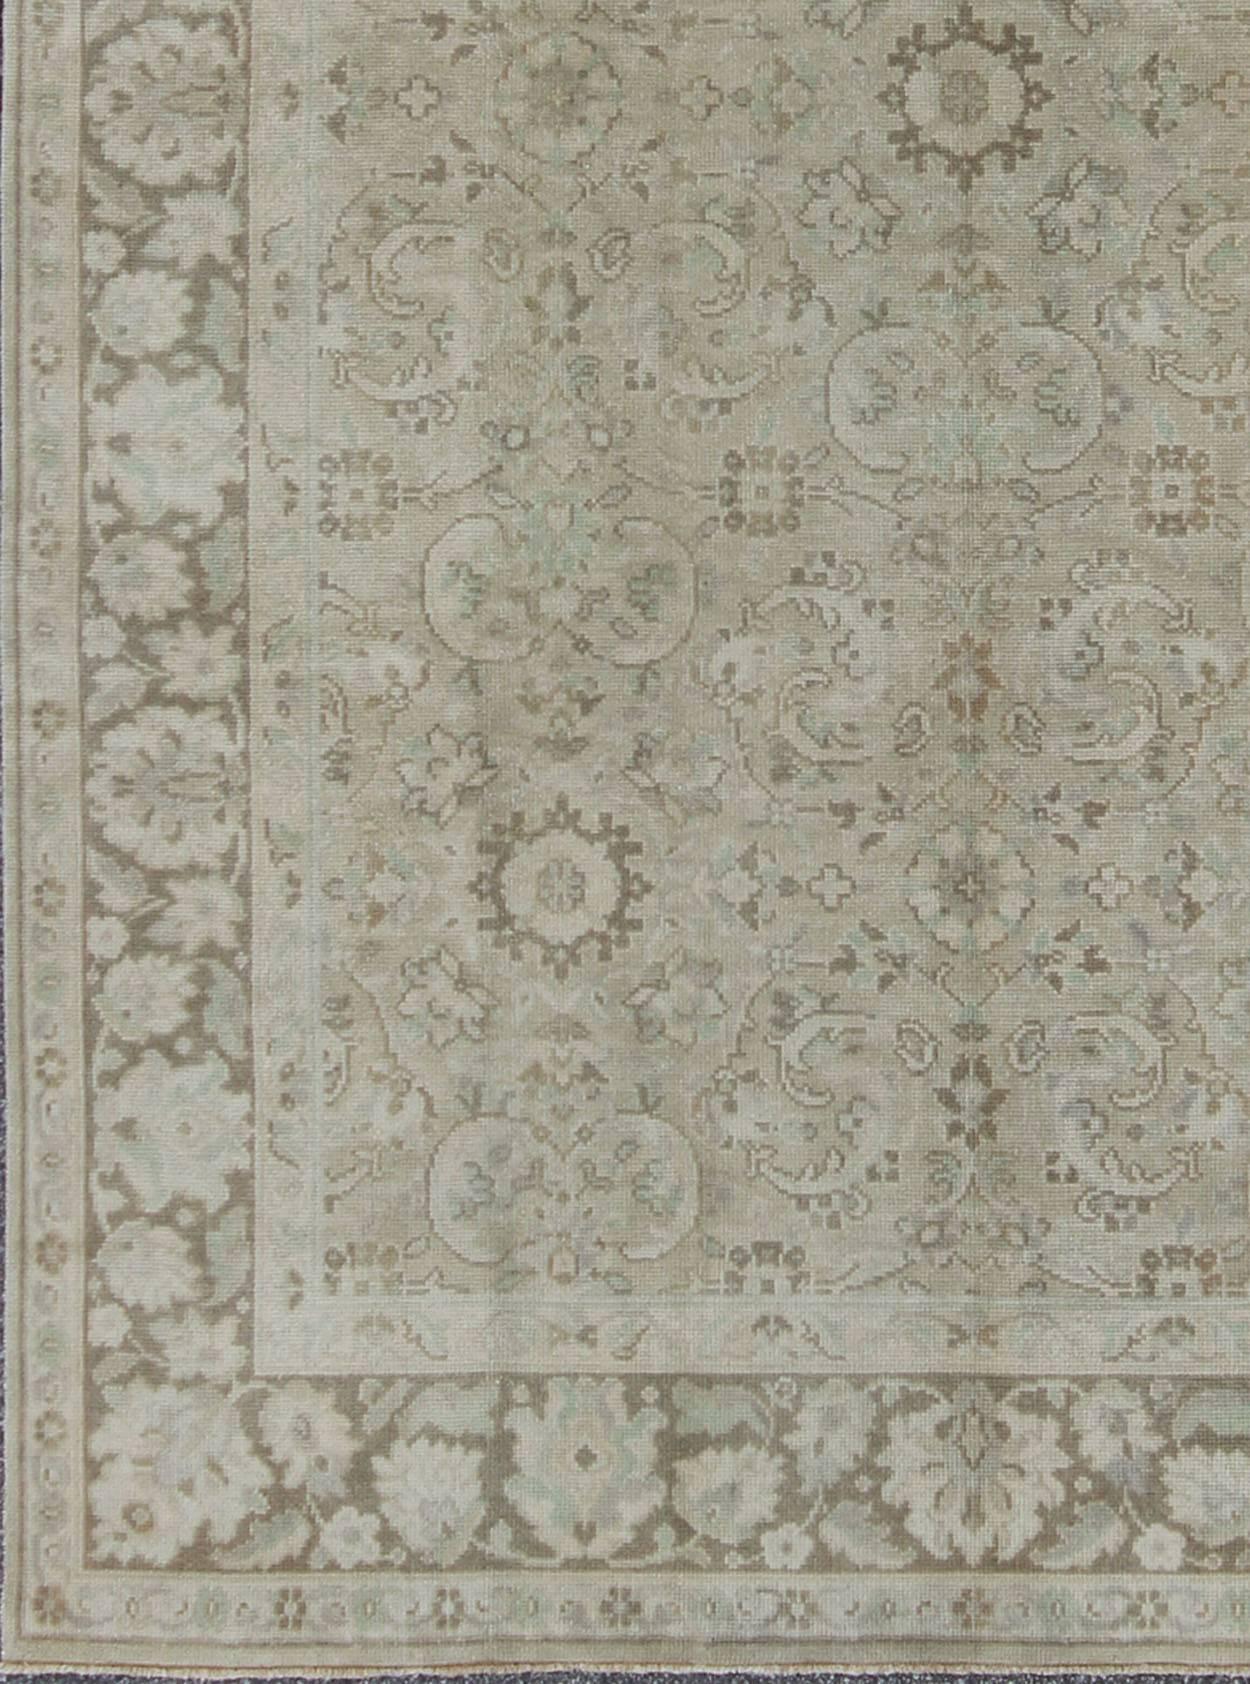 Vintage Earth Tone Oushak Rug in Sand and Taupe background with All-Over Design, Tu-Vey-4610, kwarugs. This Turkish Oushak rug features a sand-colored field and a delicate trellis design of scrolling vinery and scattered fleuron. An over-arching and